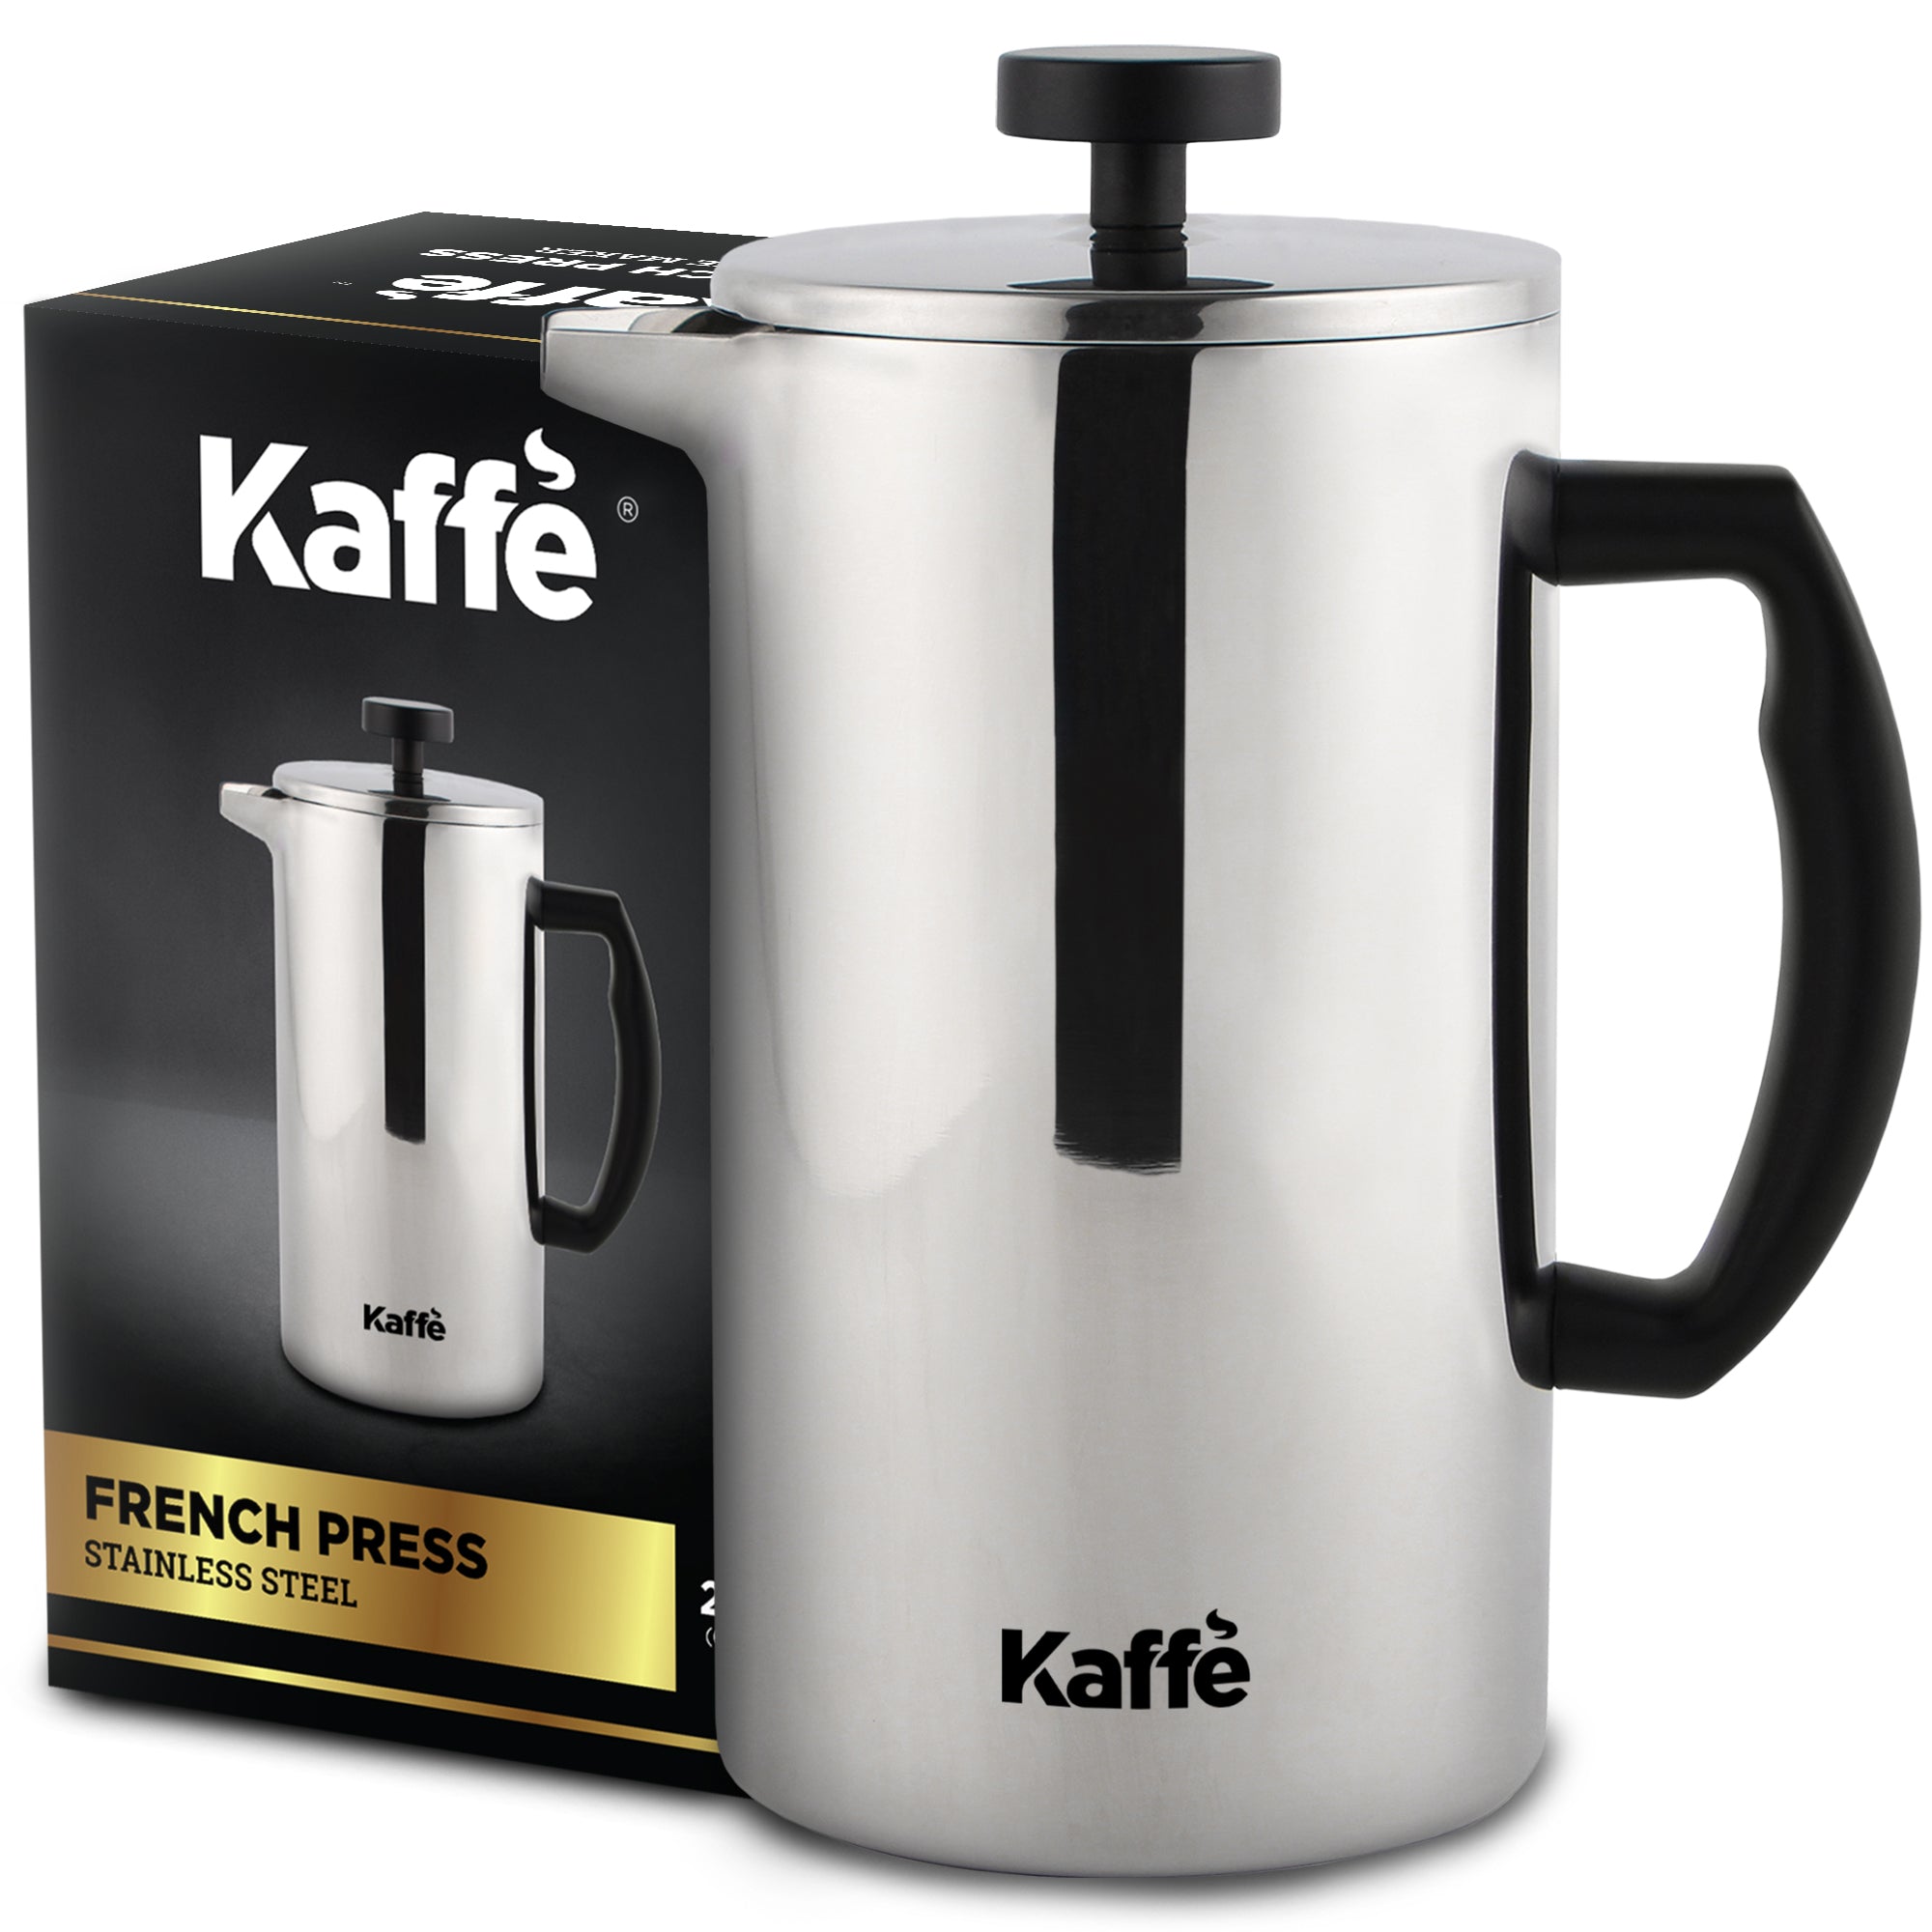 Steel Press KF1020 Stainless French Products – Kaffe